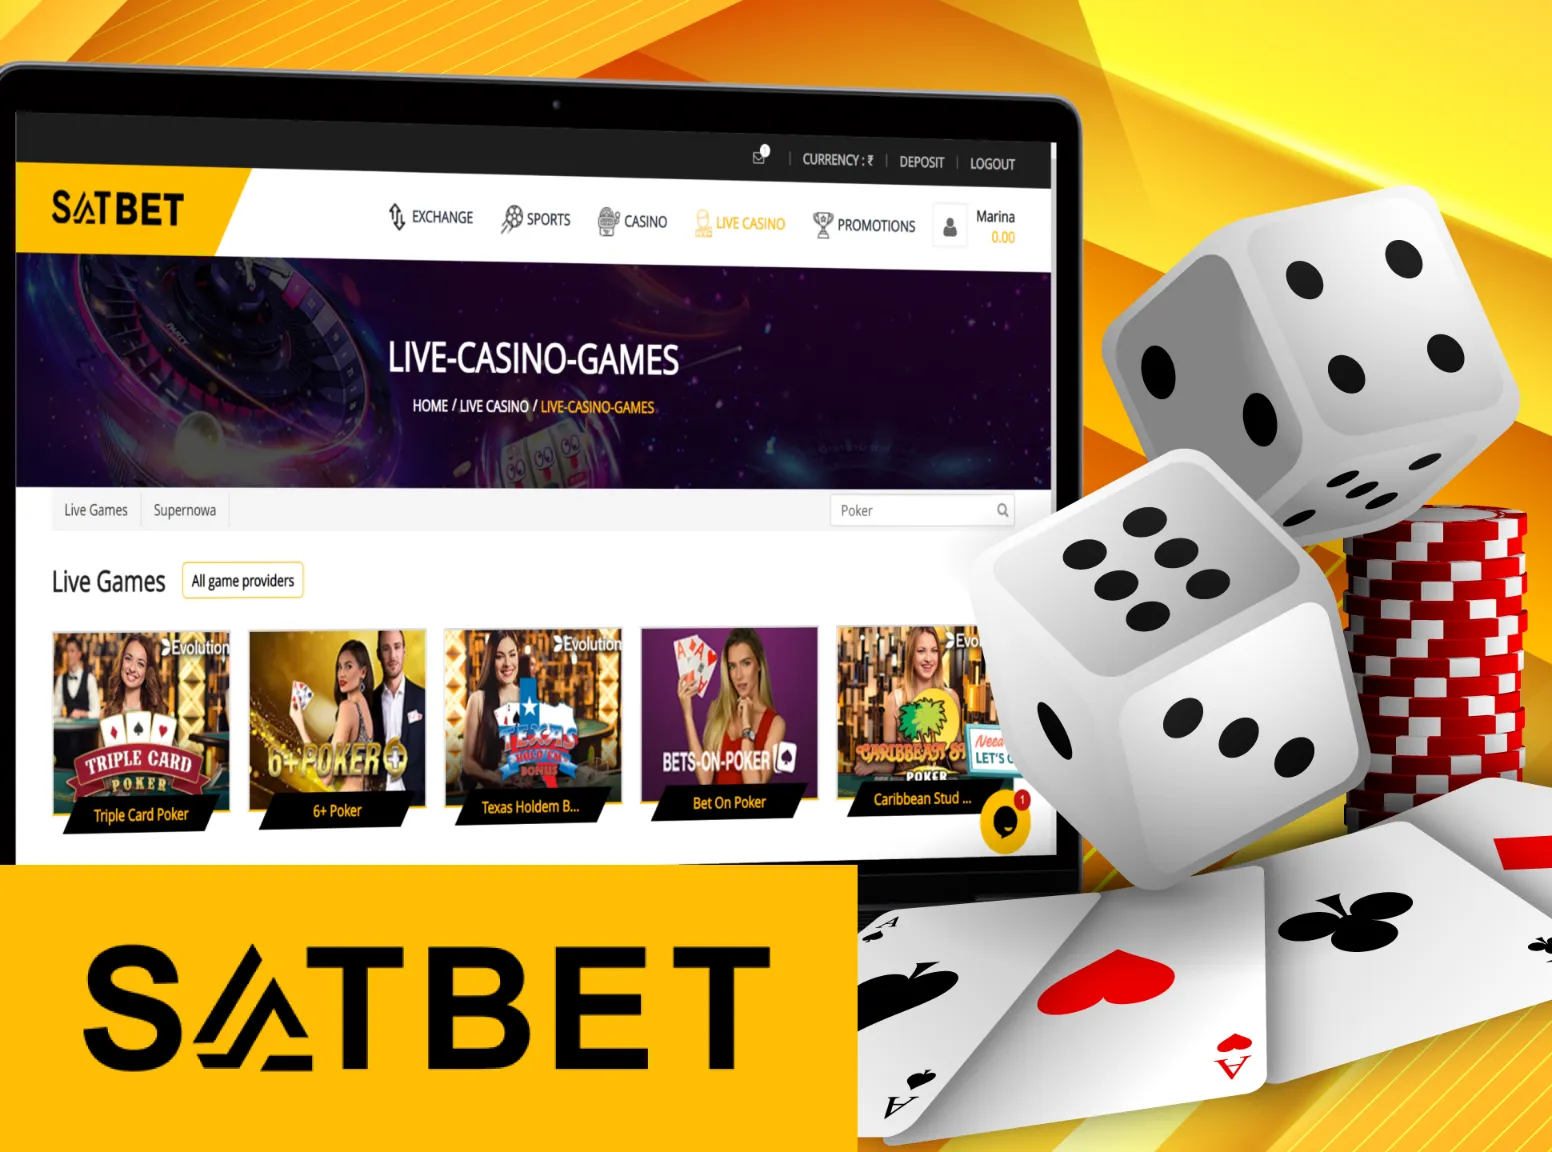 Play poker at Satbet with real people.